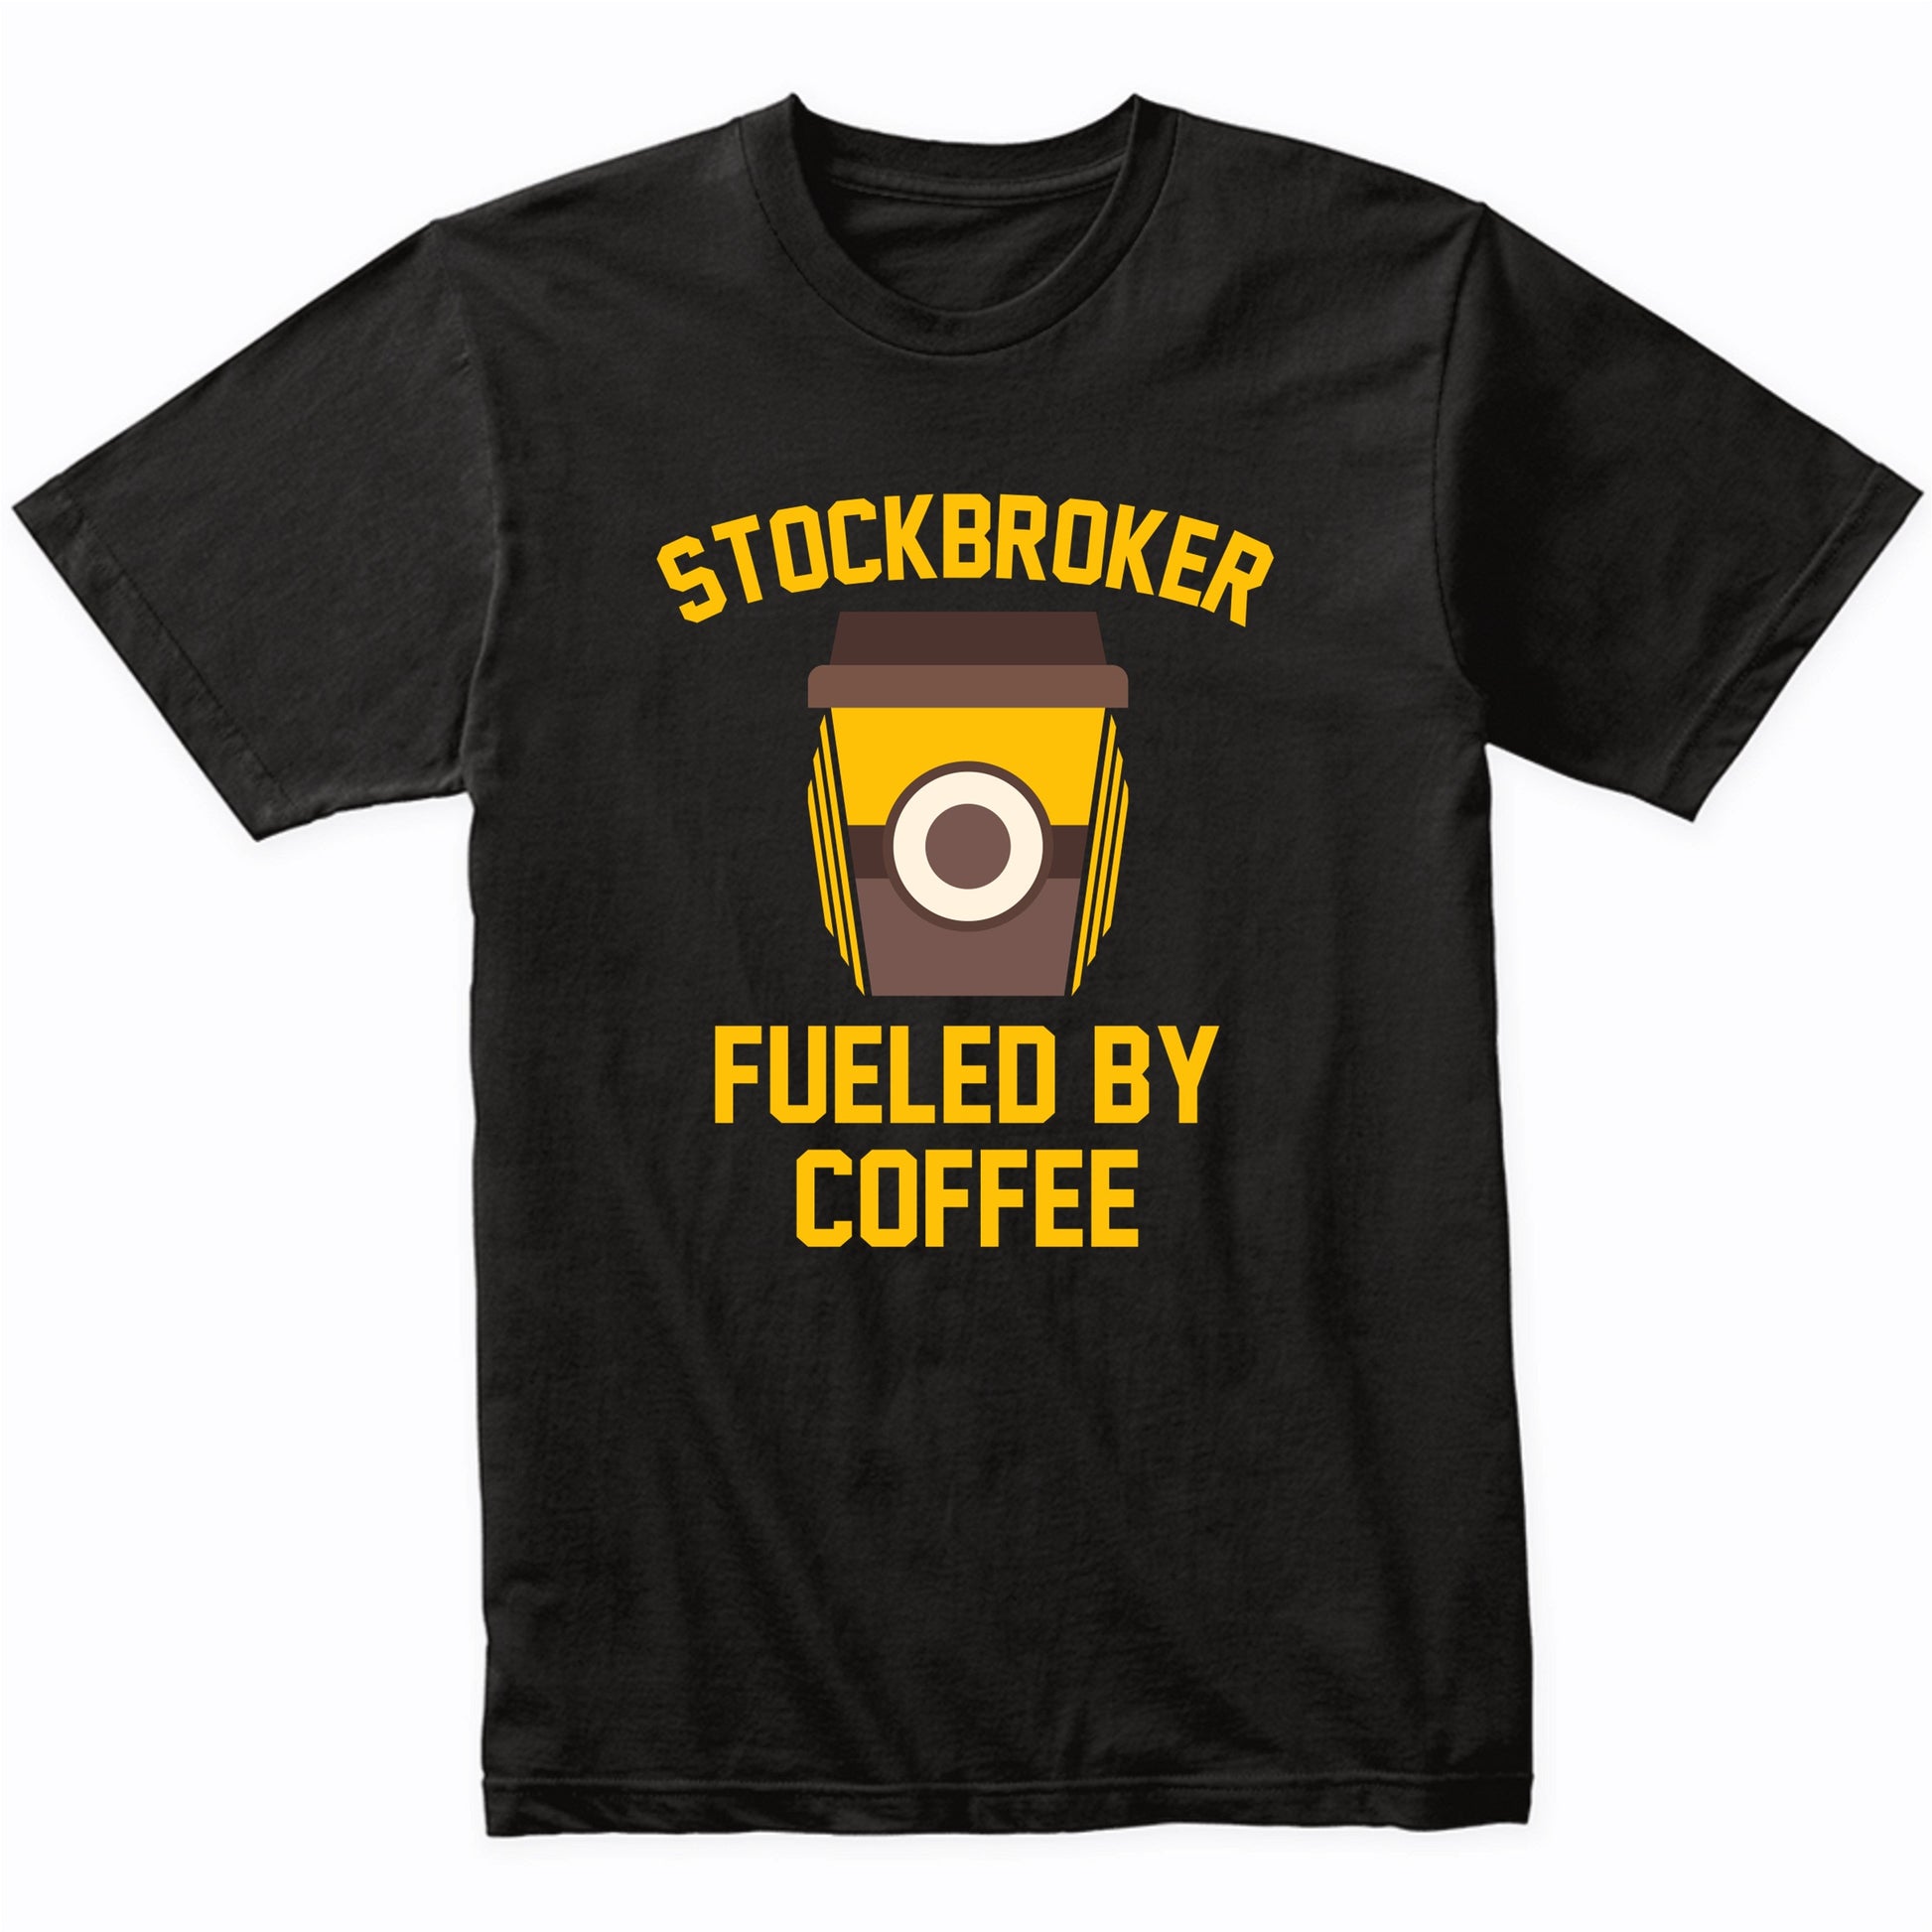 Stockbroker Fueled By Coffee Funny Shirt